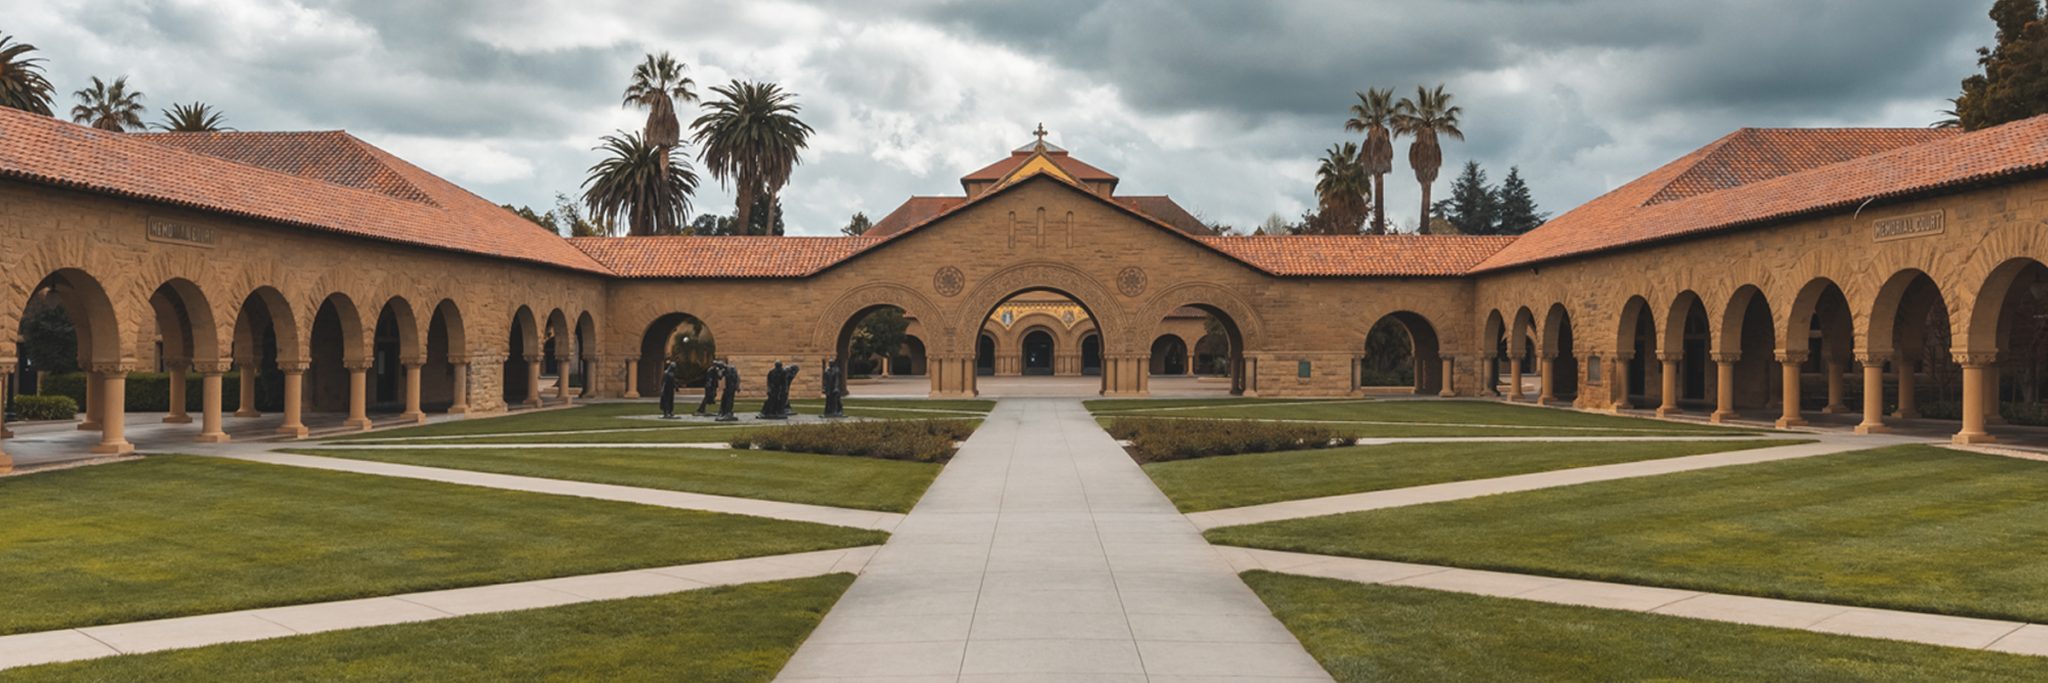 The Checklist Manifesto and  Getting into Stanford